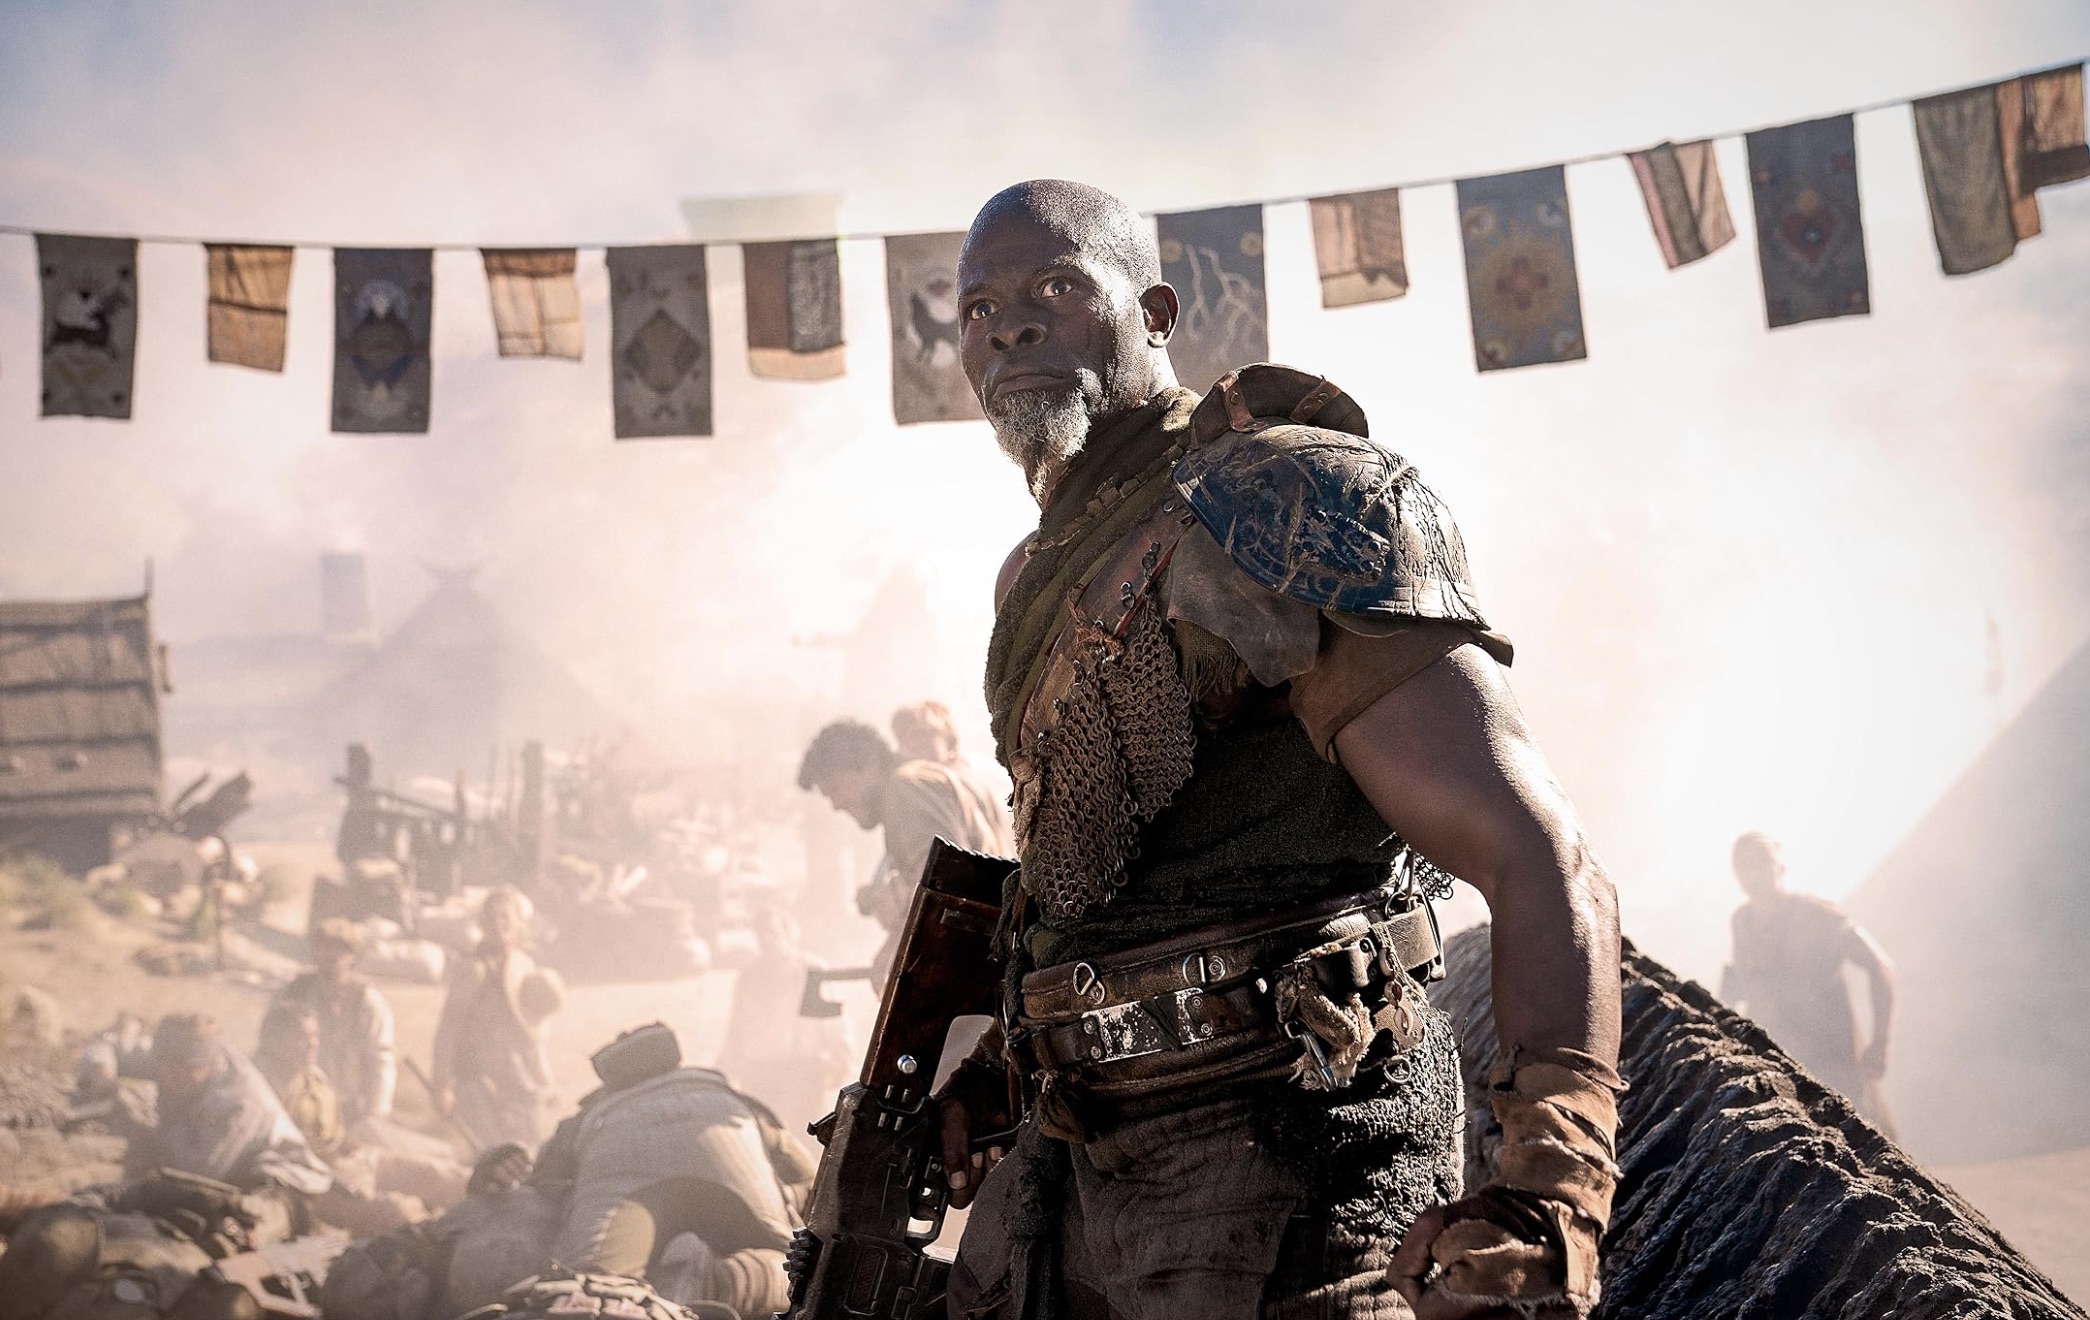 a man in gladiator-like armor stands ready to fight, with a chaotic scene in the background